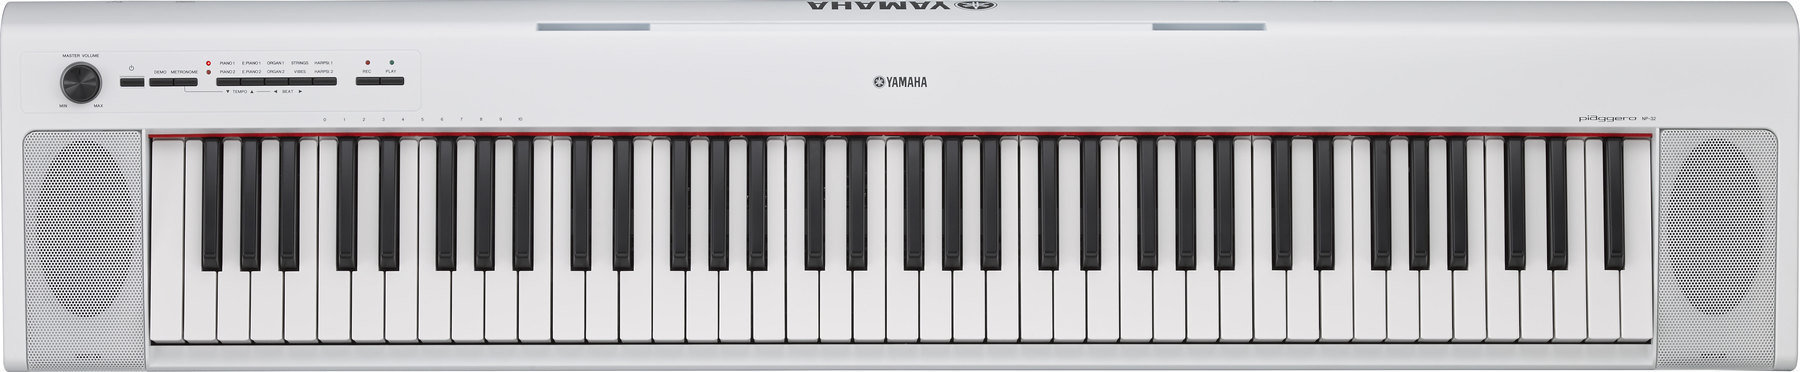 Digitaal stagepiano Yamaha NP-32 WH Digitaal stagepiano